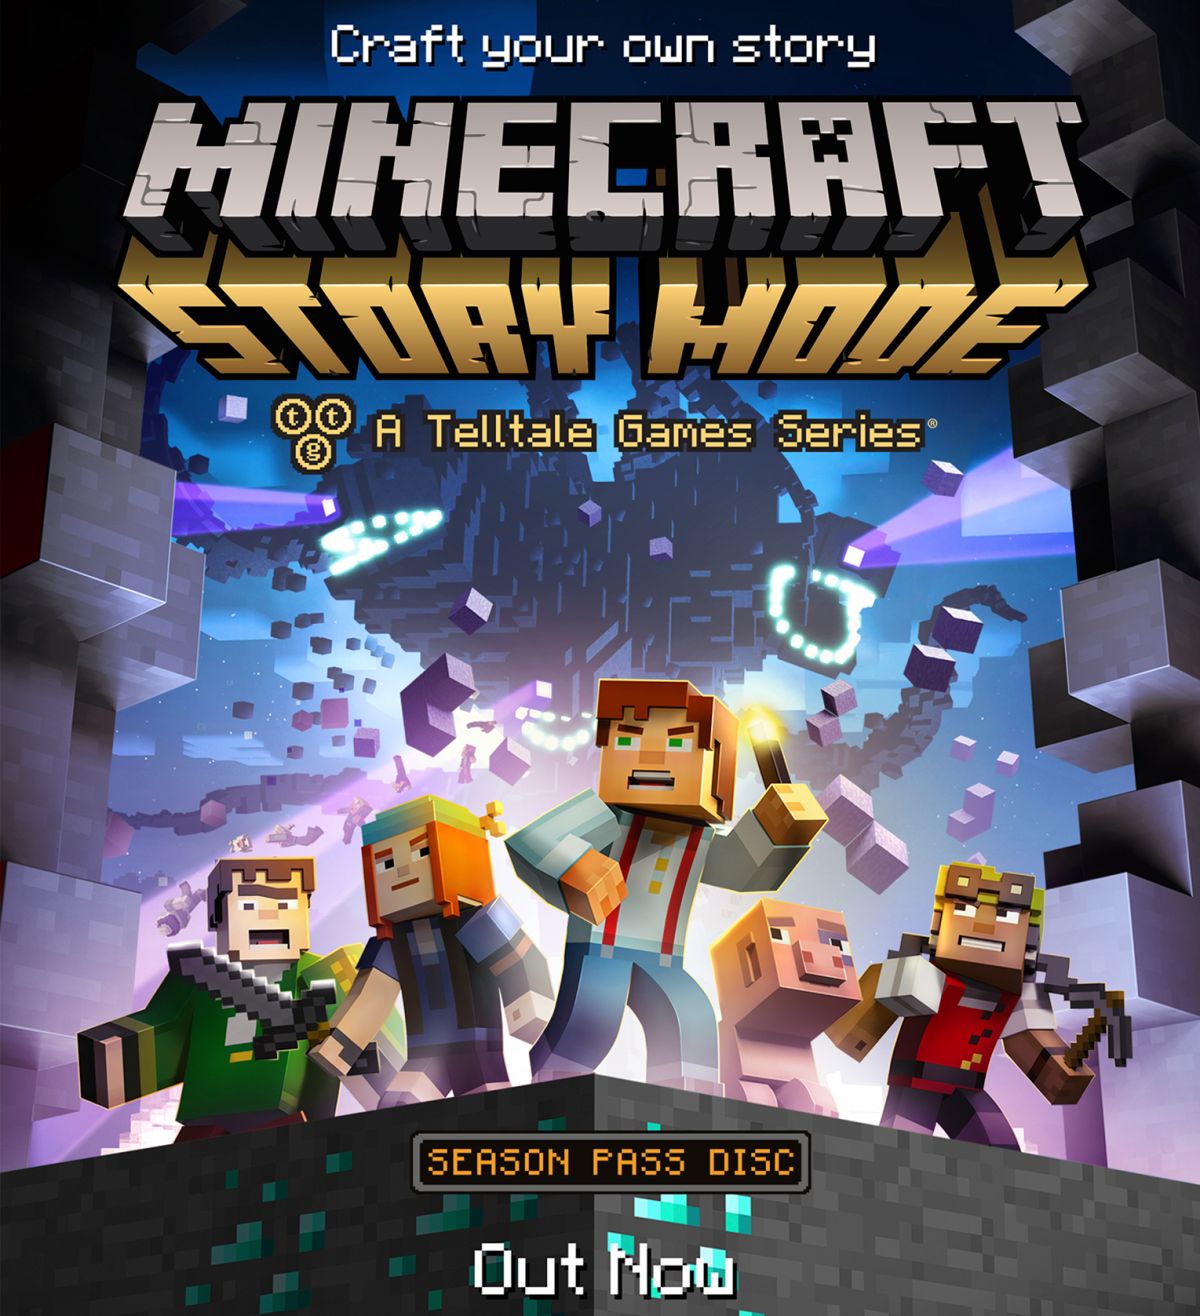 Minecraft: Story Mode Season Pass Disc In Stores Now!